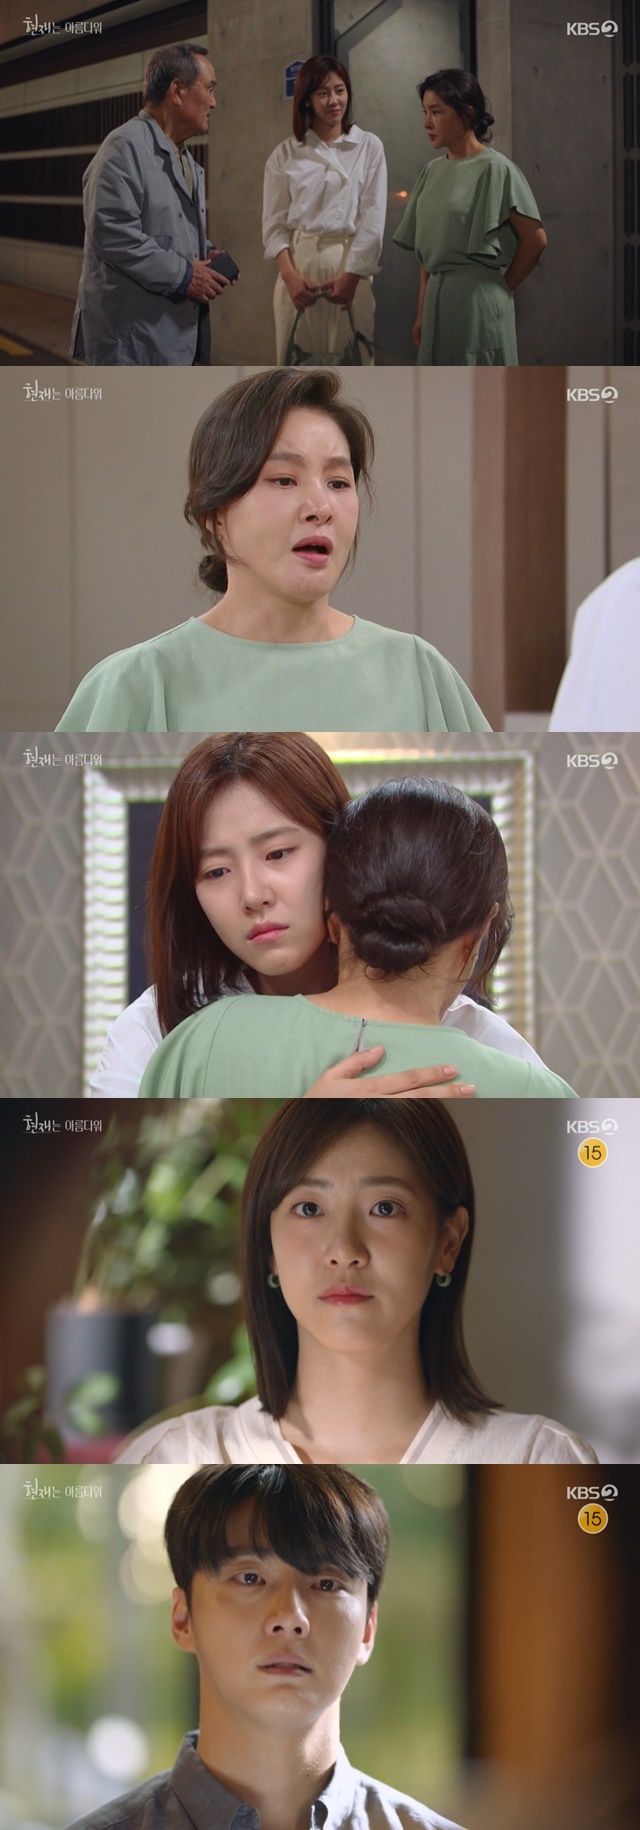 Yoon Shi-yoon Bae Da-bin breaks down tears after learning of Park In-Hwan Park Ji-Youngs paternityLee Hyun-Jae (Yoon Shi-yoon) and Hyun Mi-rae (Bae Da-bin) delayed the marriage and prepared for the farewell in the 38th episode of KBS 2TVs weekend drama Its Beautiful Now, which aired on August 7 (played by Ha Myung-hee/director Kim Sung-geun).Jin Soo-young (Park Ji-Young) met his father Lee kyung-cheol (Park In-Hwan) and returned home, and when his husband Hyun Jin-heon (Byeon Woo-min) and his mother Yoon Jung-ja (Ban Hyo-jung) said, Do not meet your biological father now, he said. The Confessions were the father-in-law of the chol.Hyun Jin-heon was worried about her daughter Hyun Mi-rae and Lee Hyun-Jaes marriage, saying, What do you do about future marriage?At the same time, Lee Hyun-Jaes mother Han Kyung-ae (Hye-ok KIM) was also surprised to learn that her daughter, who was found by Lee kyung-cheol, was Jin Soo-jeong through the Shibu Lee kyung-cheol.Lee kyung-cheols younger brother Lee Kyung-soon (Sun Woo-yong) is also surprised and says, This marriage is not possible. Meet your child with your son?Is there anything in the world that is so bad? he opposed Lee Hyun-Jae and the current future marriage.Lee Min-ho asked his daughter-in-law Shim Hae-joon (Shin Dong-mi) for legal advice first, and Shim Hae-jun said that if Lee kyung-cheol and Jin Soo-jeong recover their relationship with their daughters, they should not report their marriage to Lee Hyun-Jae. I predicted.Lee Min-ho told his son Lee Hyun-Jae to put off the marriage date once and Lee Hyun-Jae was embarrassed not knowing the English language.Hyun Mi-rae was also wondering when he heard his father Hyun Jin-heons request to postpone the marriage date, and Lee Hyun-Jae was more suspicious when he heard the same word from Hyun Mi-rae to postpone marriage.In the meantime, Lee Min-ho met Hyun Jin-heon and said, I am thinking about Lee Hyun-Jae and the marriage of the present future.Lee Hyun-Jae went to his home and said, I can not understand it.Is it understandable that you will postpone without any reason for marriage date? Lee Min-ho tried to keep it secret for a while, but Han Kyung-ae (Hye-ok KIM) said, Do you think she will just pass?Were still arguing, he said, but this time, my grandfathers daughter is the future mother. Were not out of shock yet.Lee Hyun-Jae found out that his father Lee Min-ho had already asked Shim Hae-joon for legal advice, and Shim Hae-joon said that it is difficult to report marriage if Lee kyung-cheol and Jin Soo-jeong recover legal and female relations.Lee Hyun-Jae was devastated home and wept while exchanging text messages with Hyun Mi-rae.Lee Min-ho met Jin Soo-jeong and handed a letter written by Lee kyung-cheol every daughters birthday, saying, I have now found the owner.When Jin Soo-jeong did not want to see the letter, Lee Min-ho said, Please.Lee kyung-cheol went to the front of Jin Soo-jeongs house and said, Do not you wonder where your mother is? And I saw Hyun Mi-rae who was returning home.When Hyun Mi-rae asked, What is your grandfathers story to tell your mother? Jin Soo-jeong said, It is my father.Im sorry that my mother interrupted you when Im blessed in my life to meet a good man. Its not my mothers fault, said Hyun Mi-rae, tearing up Confessions.I dont have to be sorry, Im fine, said Jin Soo-jeong, who was comforted by her mother.